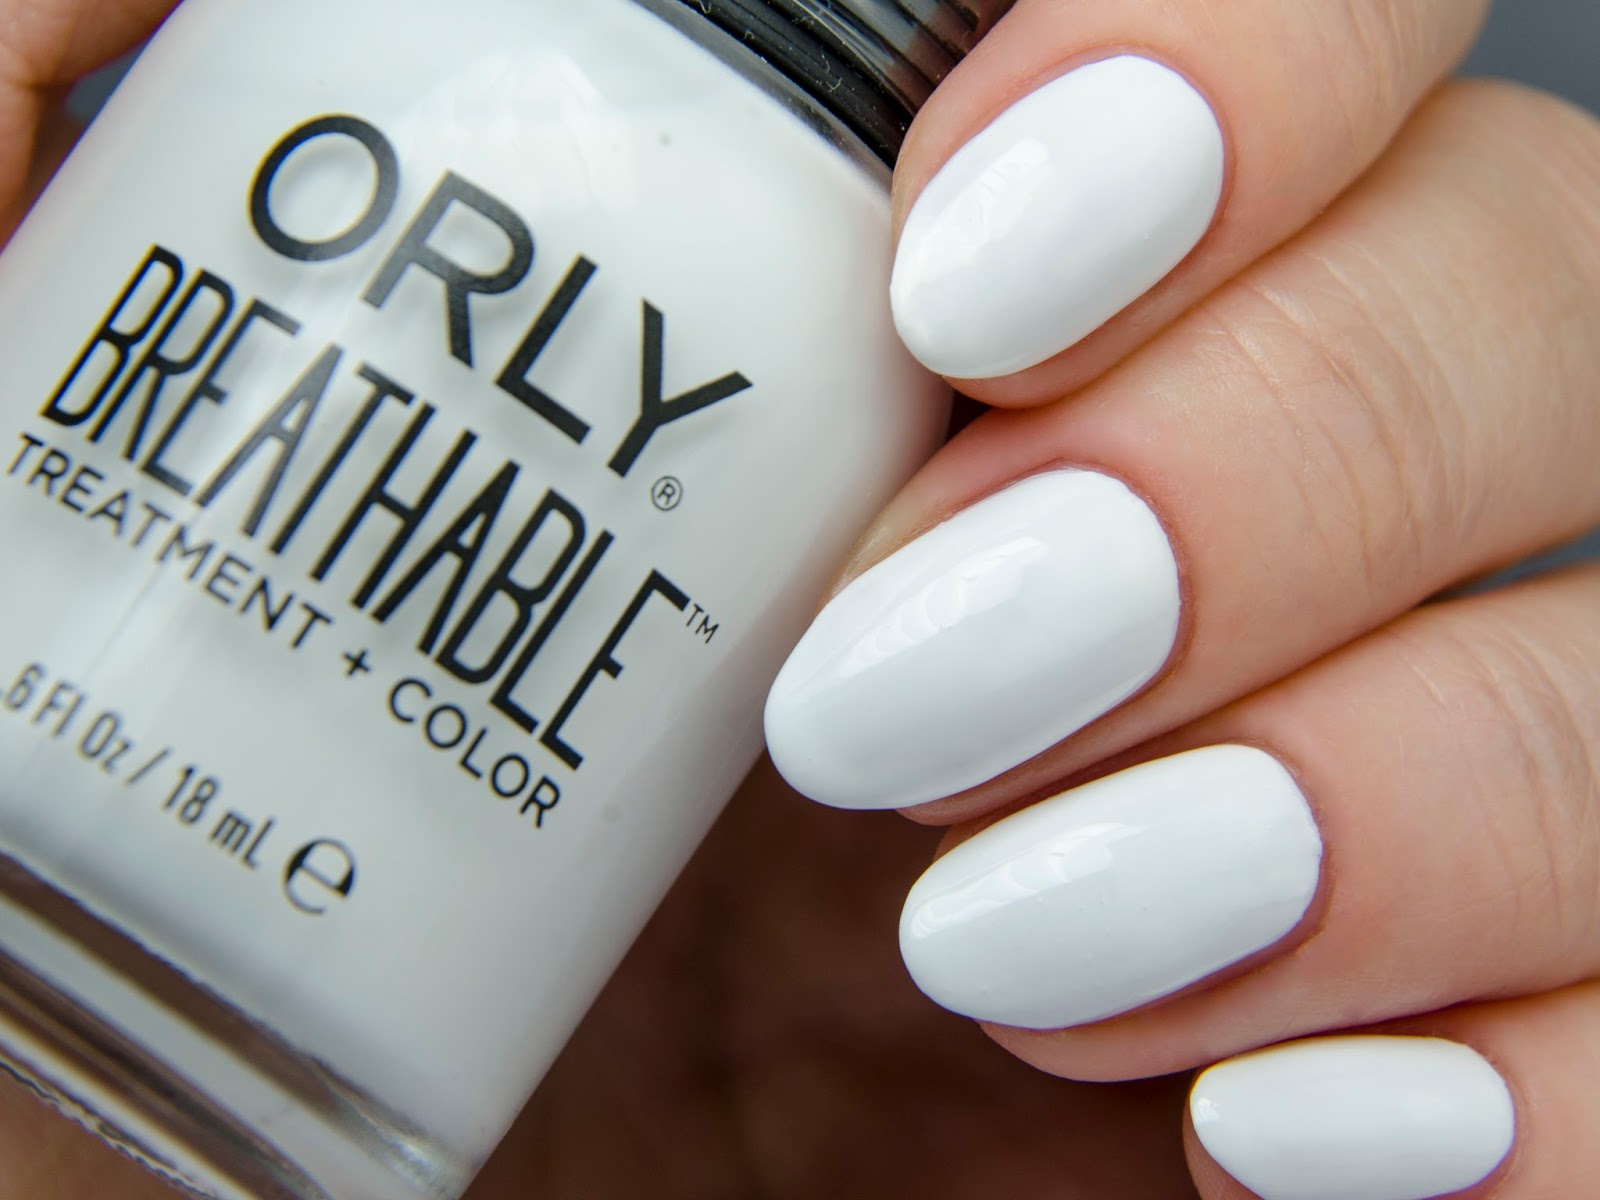 7. Orly Nail Lacquer in "White Tips" - wide 1